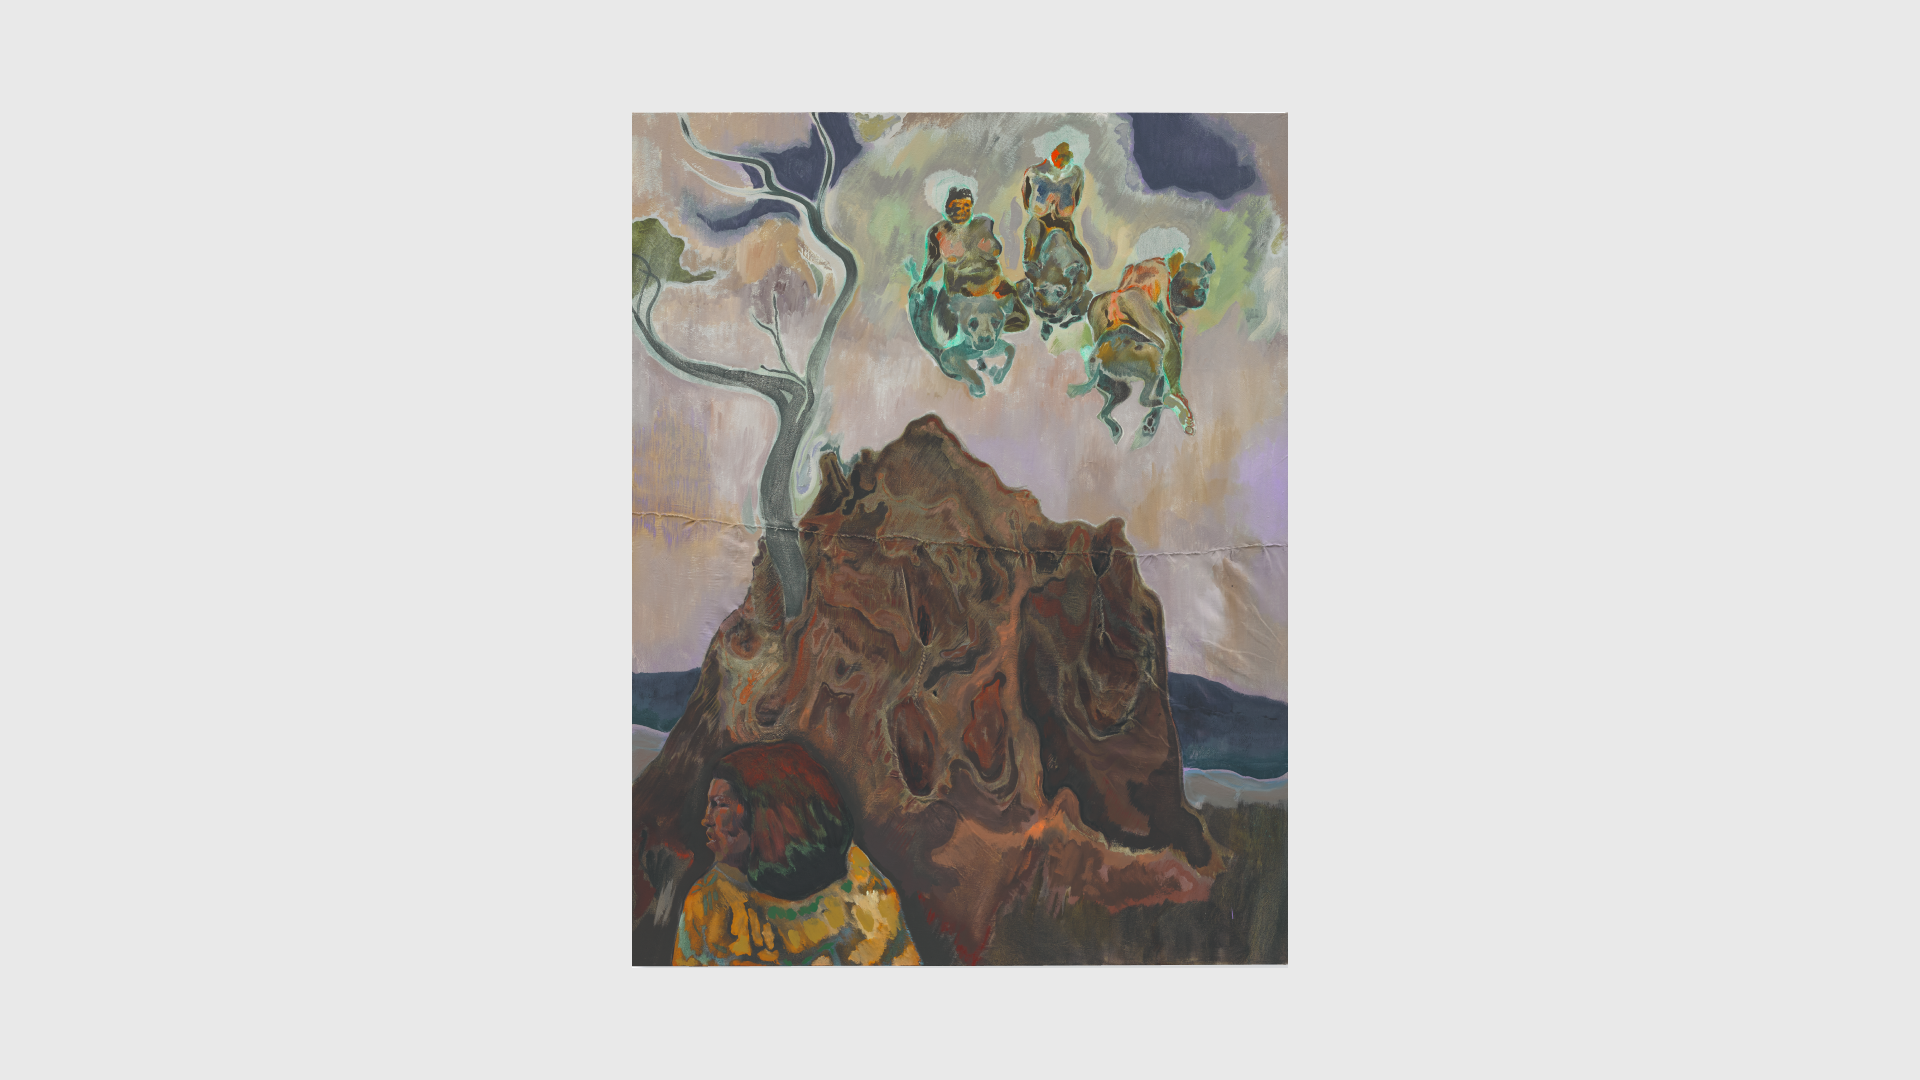 A painting by Michael Armitage, titled Anthill, dated 2017.